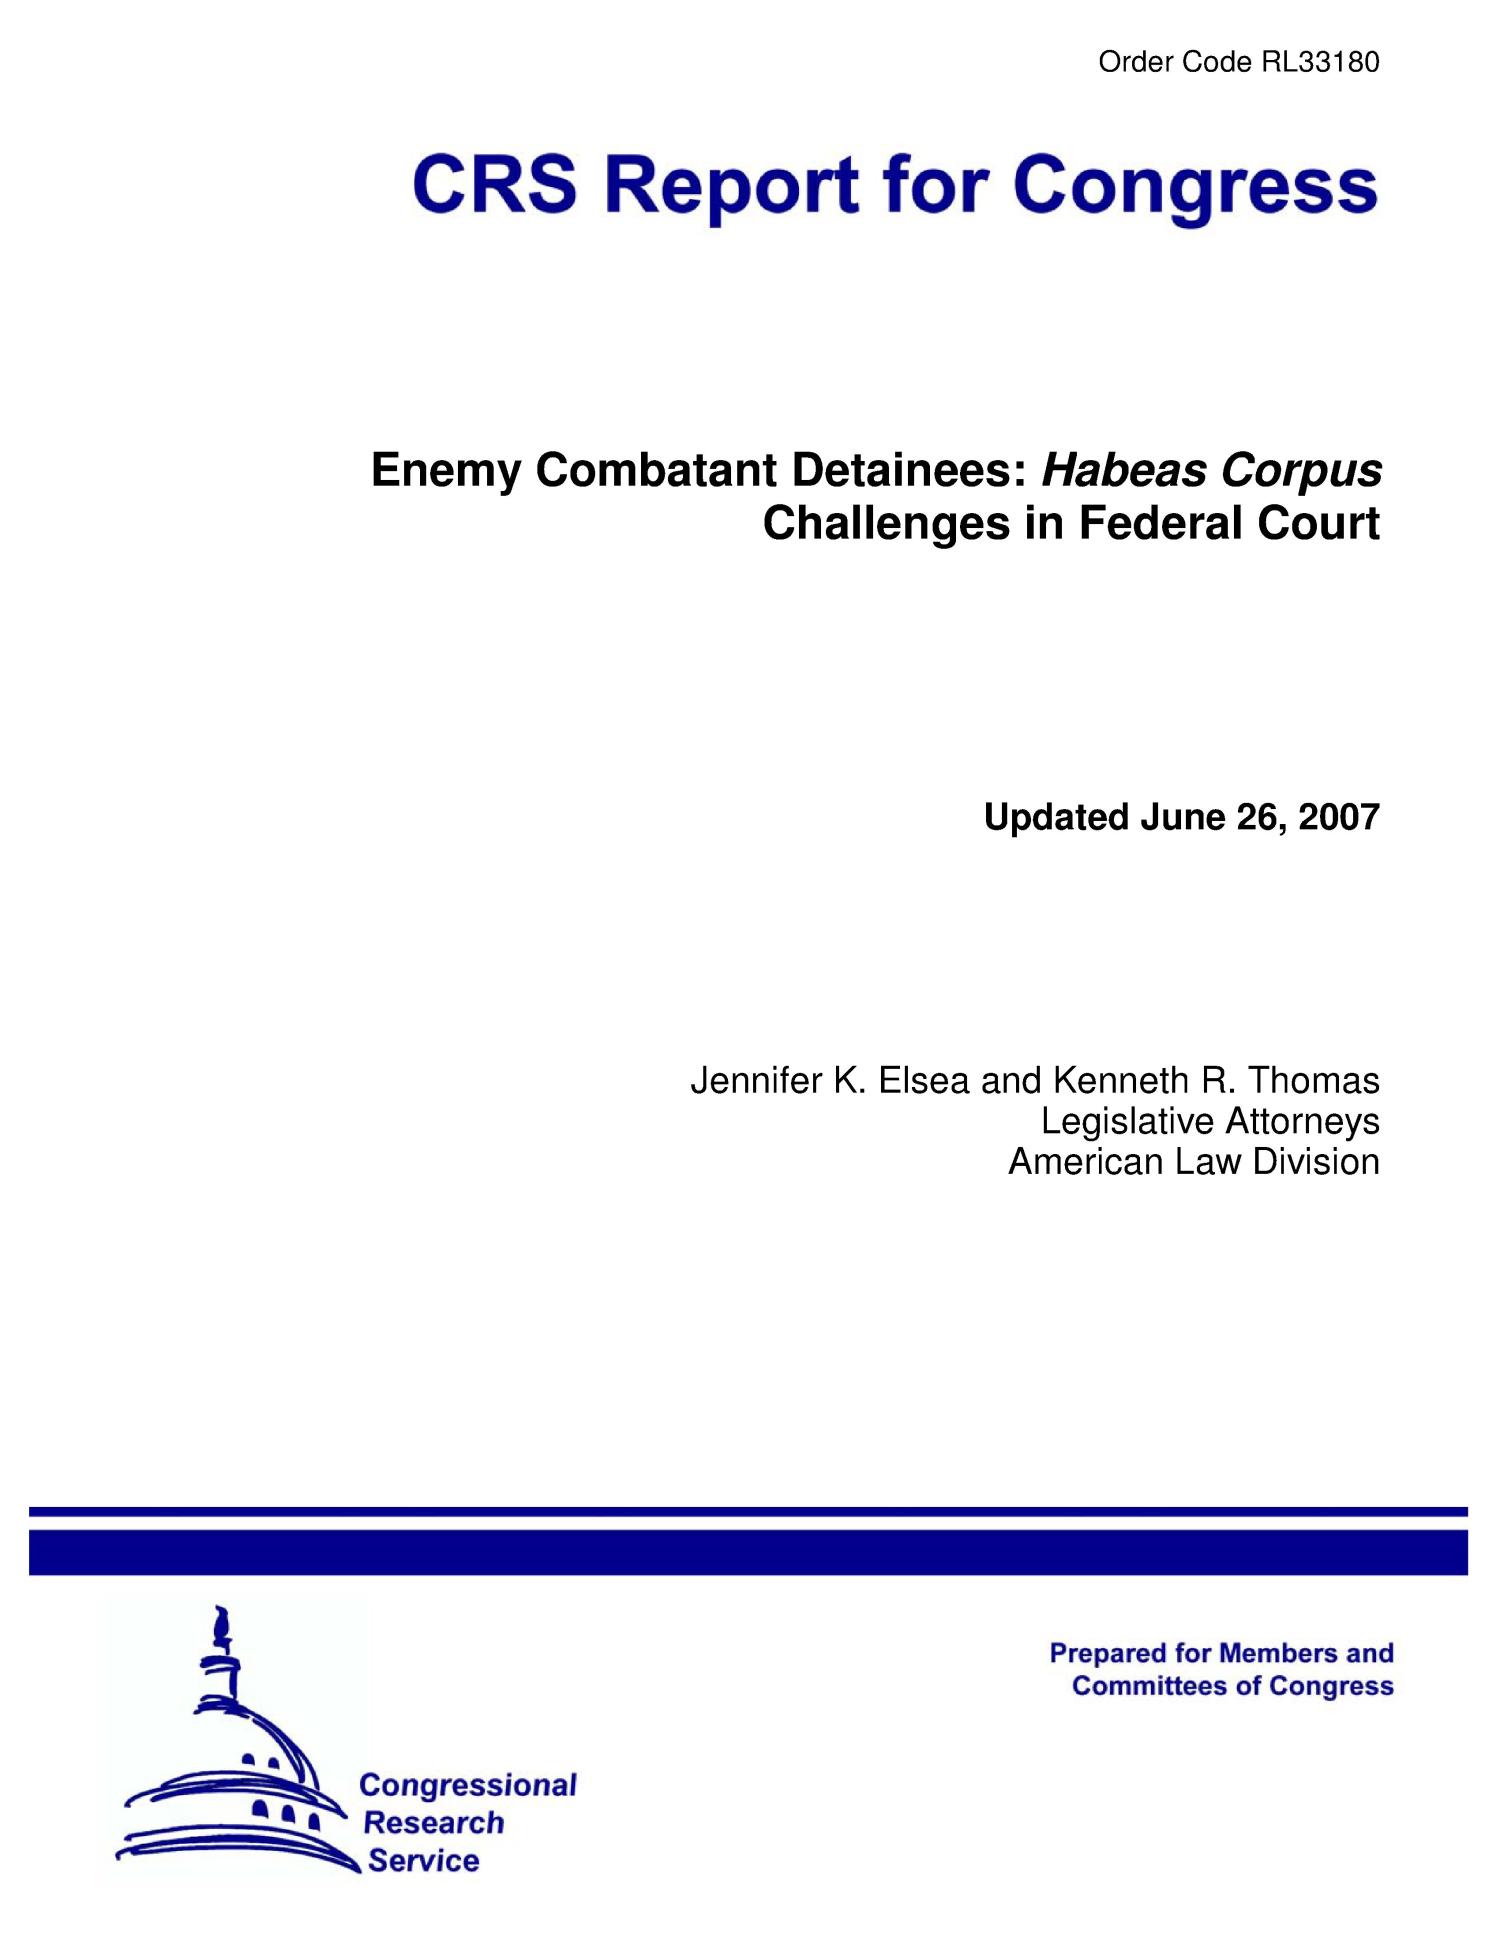 Enemy Combatant Detainees: Habeas Corpus Challenges in Federal Court
                                                
                                                    [Sequence #]: 1 of 45
                                                